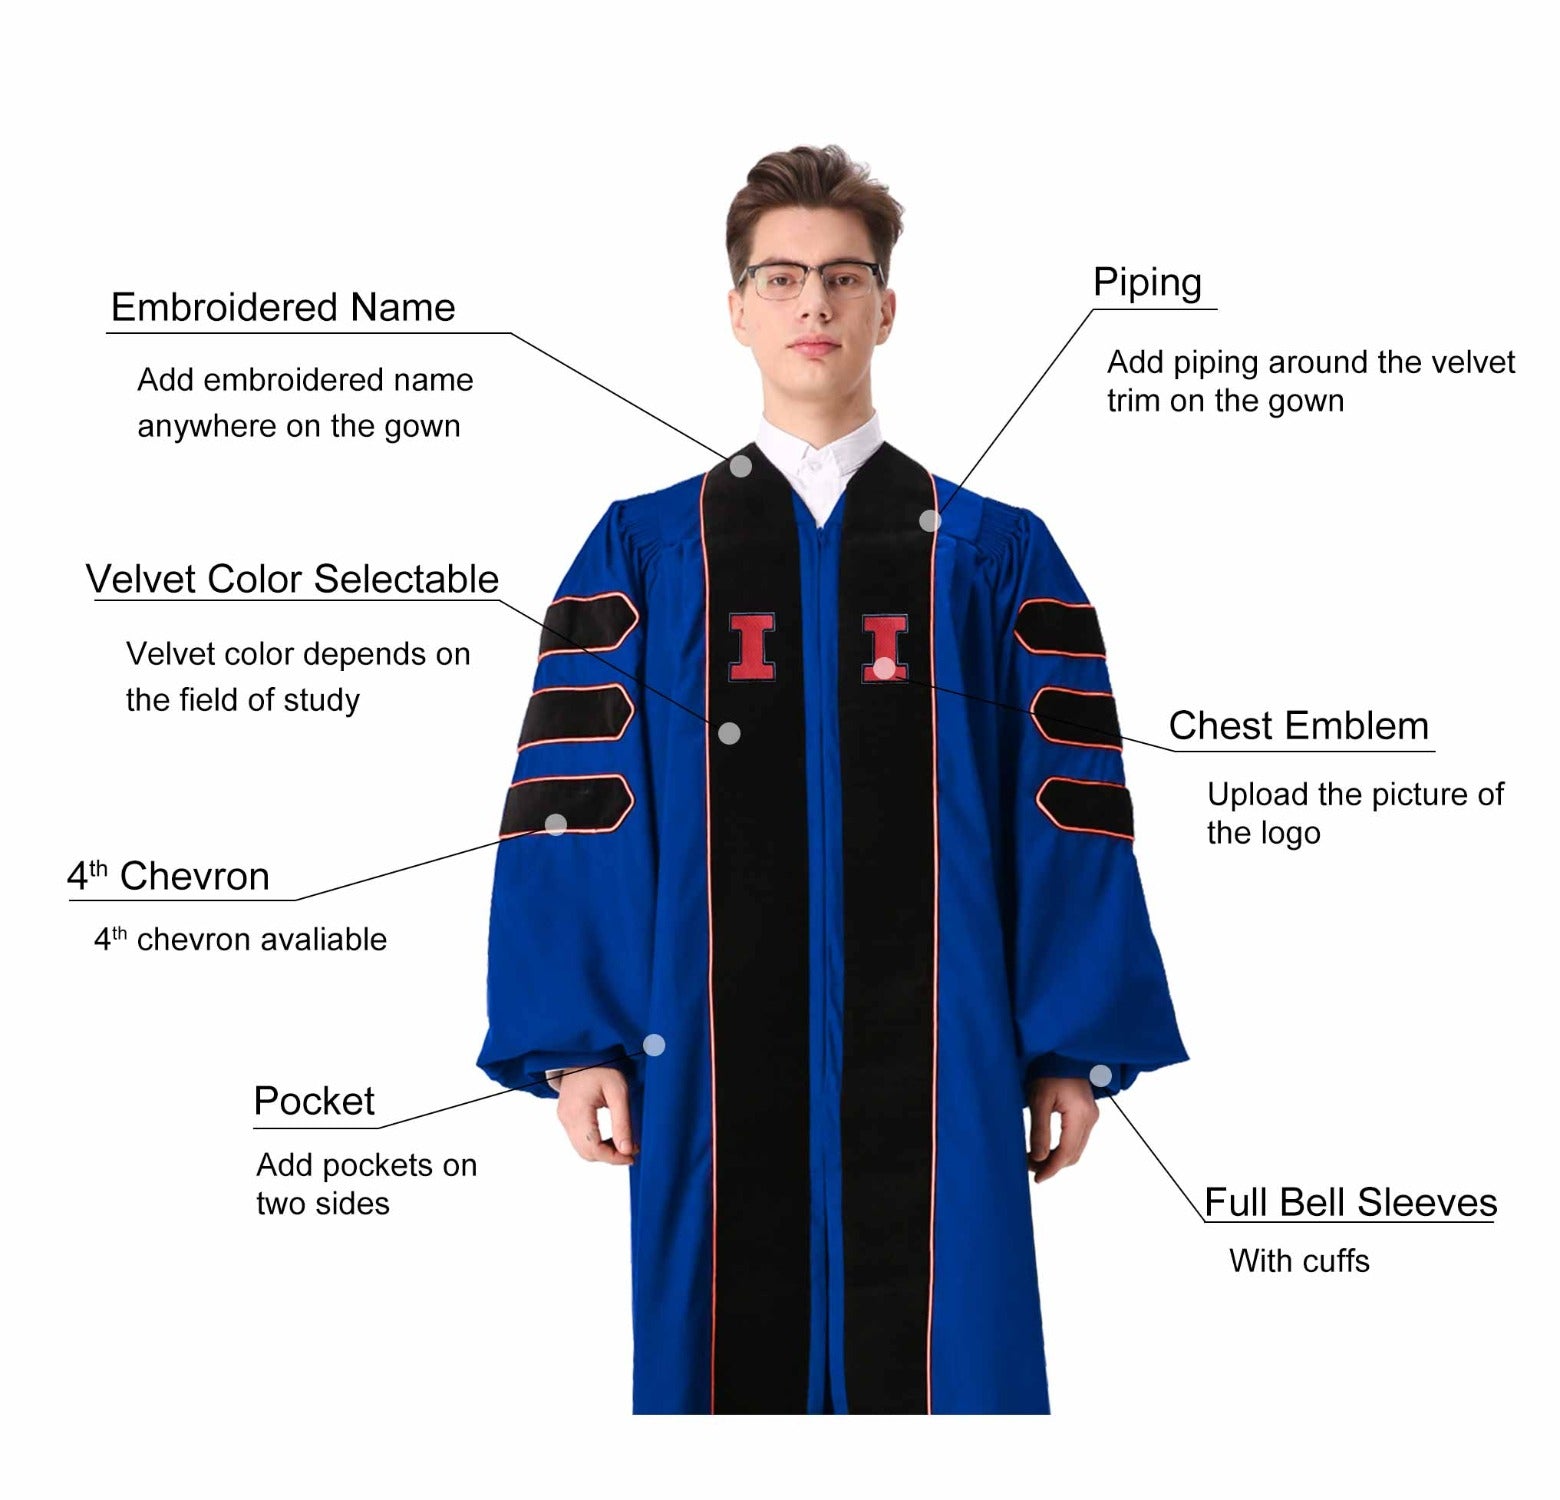 Why is doctoral academic regalia so expensive? What options do I have,  besides paying nearly $1000 for the gown, hood, and tam? - Quora